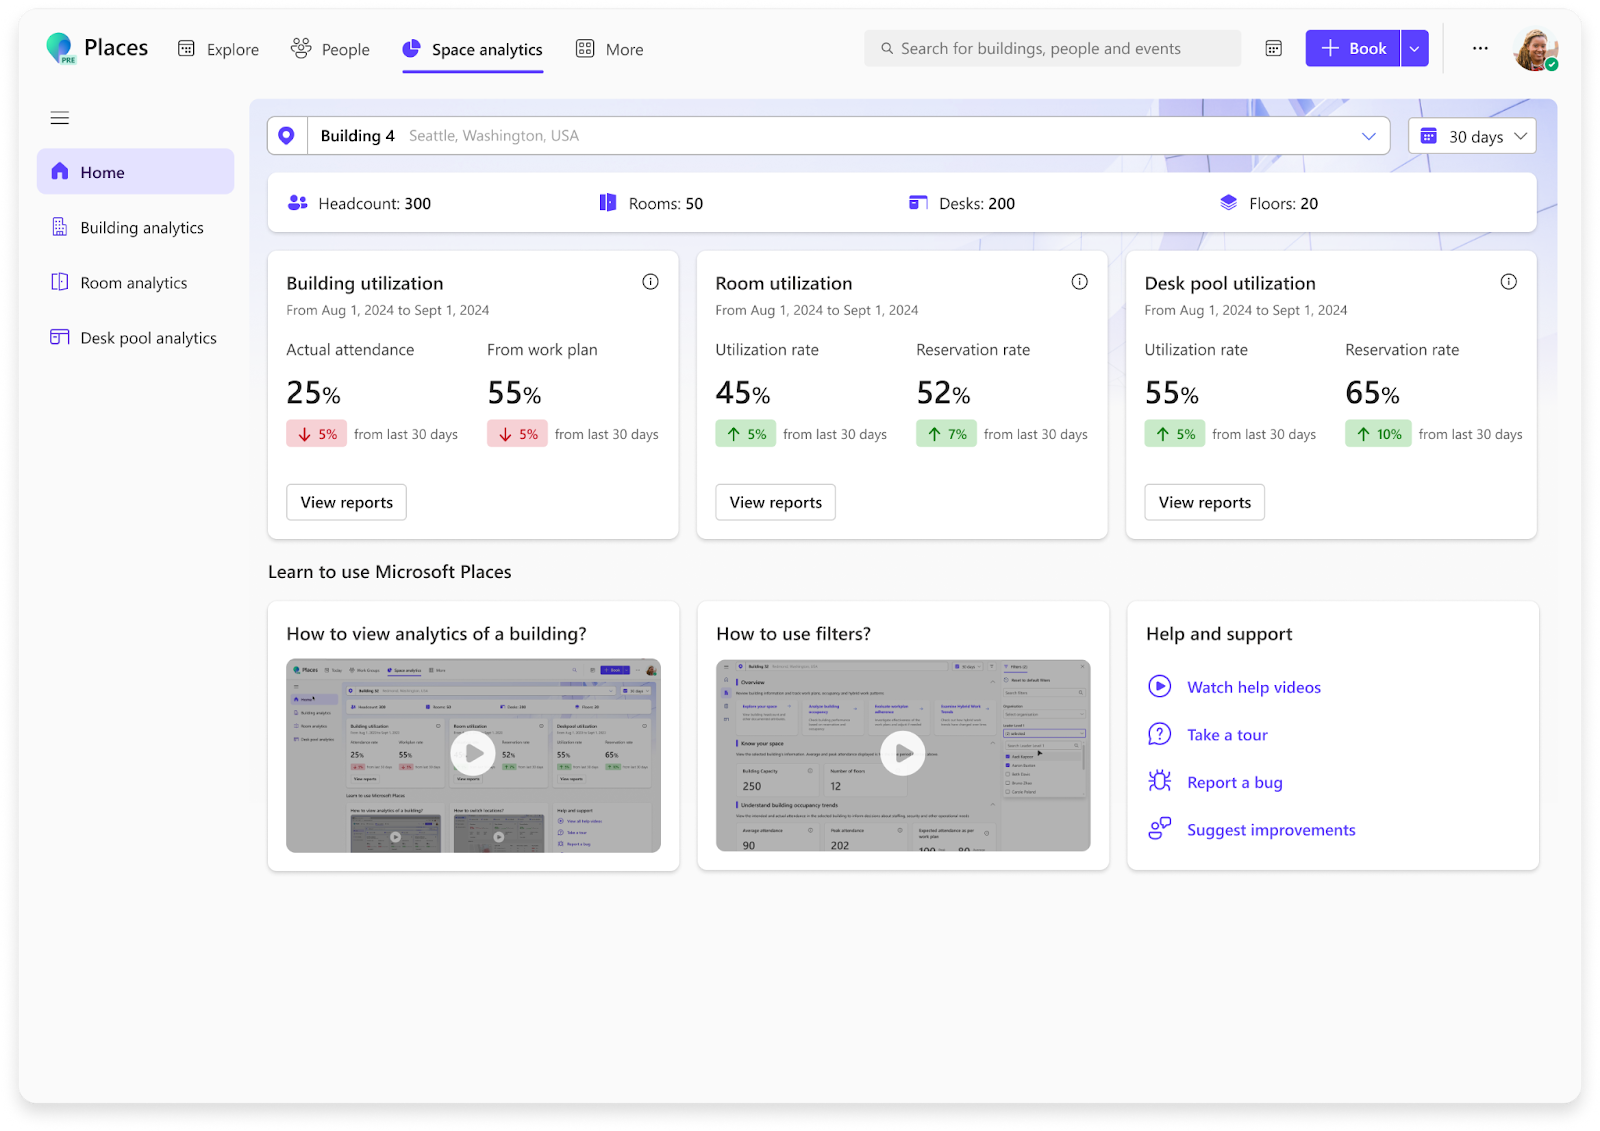 VergeSense+Microsoft Places Integration: Enhanced Tools for Optimizing the Workplace